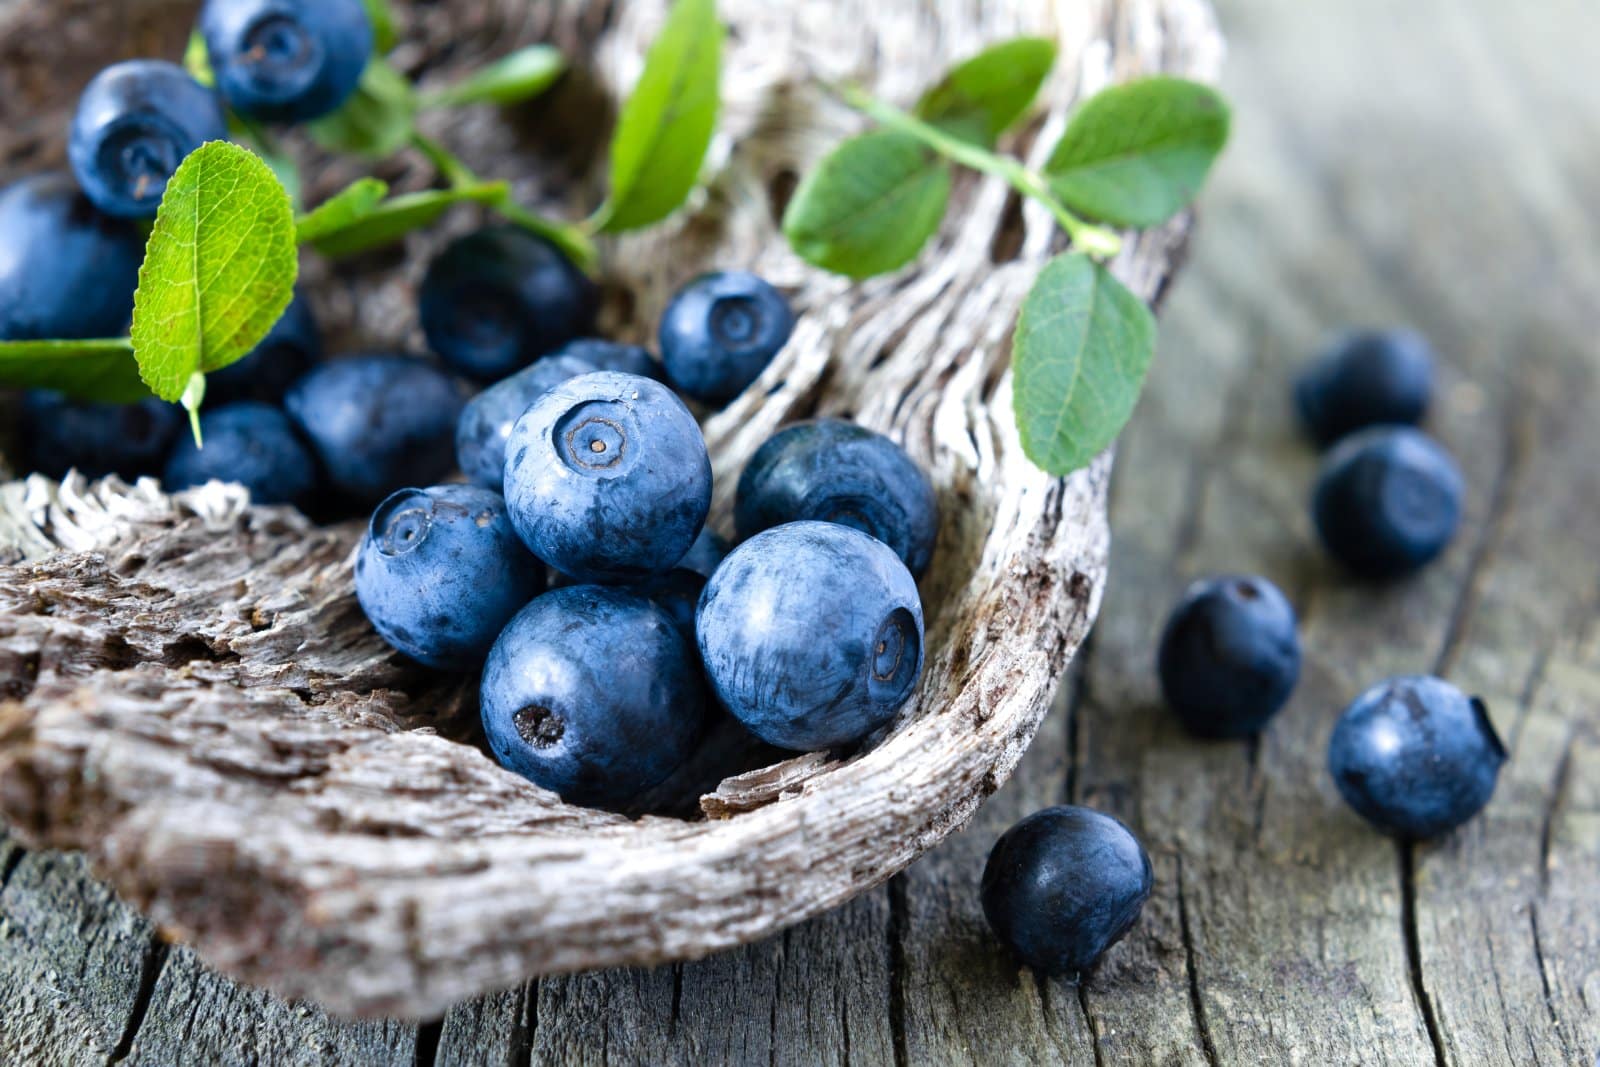 <p class="wp-caption-text">Image Credit: Shutterstock / Sunny Forest</p>  <p>Celebrate Maine’s state berry at the Wild Blueberry Festival in Machias. It’s a sweet blend of food, arts, and community spirit, with free admission and berry delights for every palate.</p>